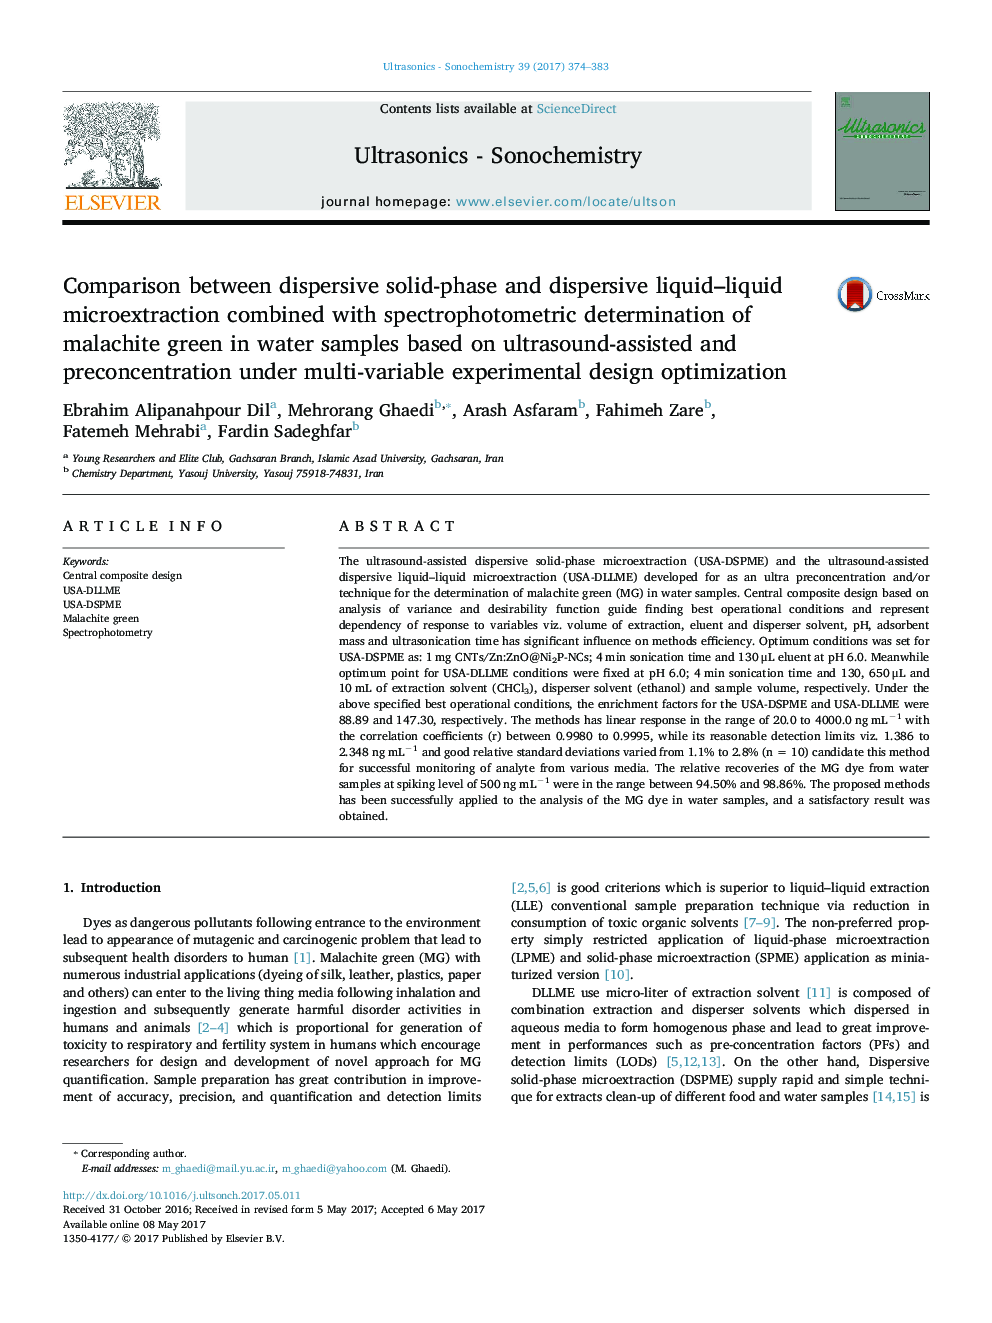 Comparison between dispersive solid-phase and dispersive liquid-liquid microextraction combined with spectrophotometric determination of malachite green in water samples based on ultrasound-assisted and preconcentration under multi-variable experimental d